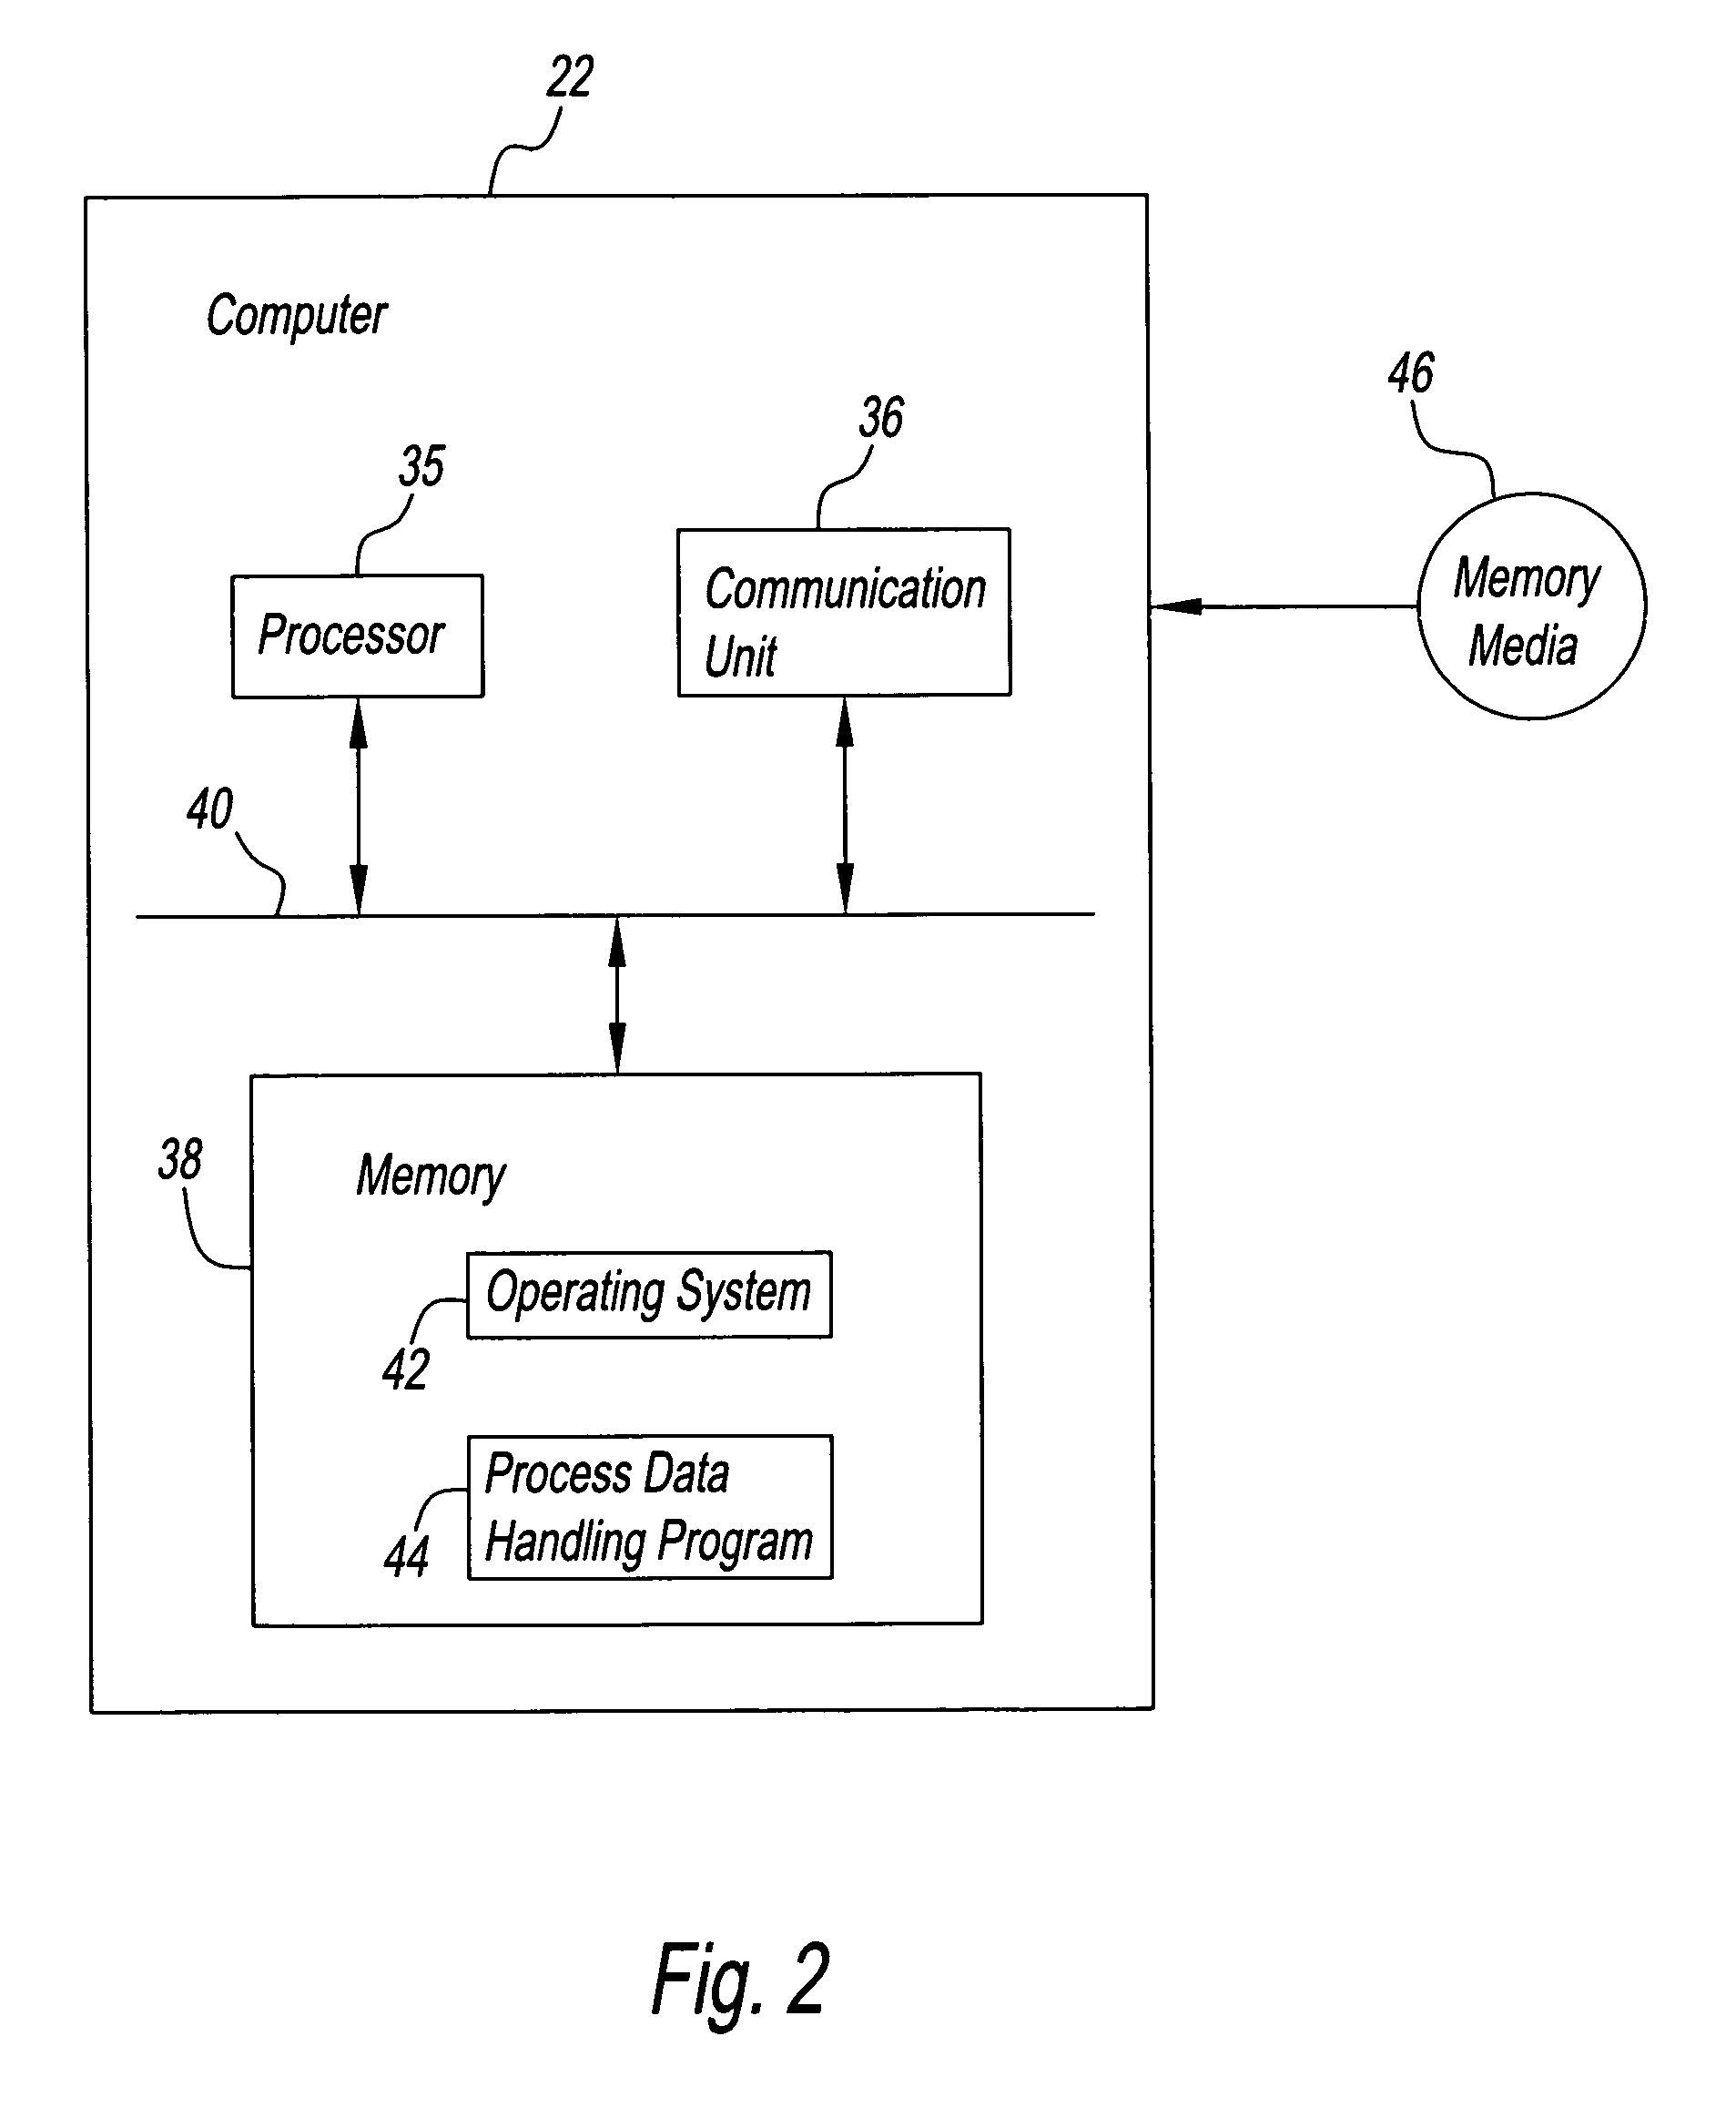 Method and system for capturing, storing and retrieving events and activities